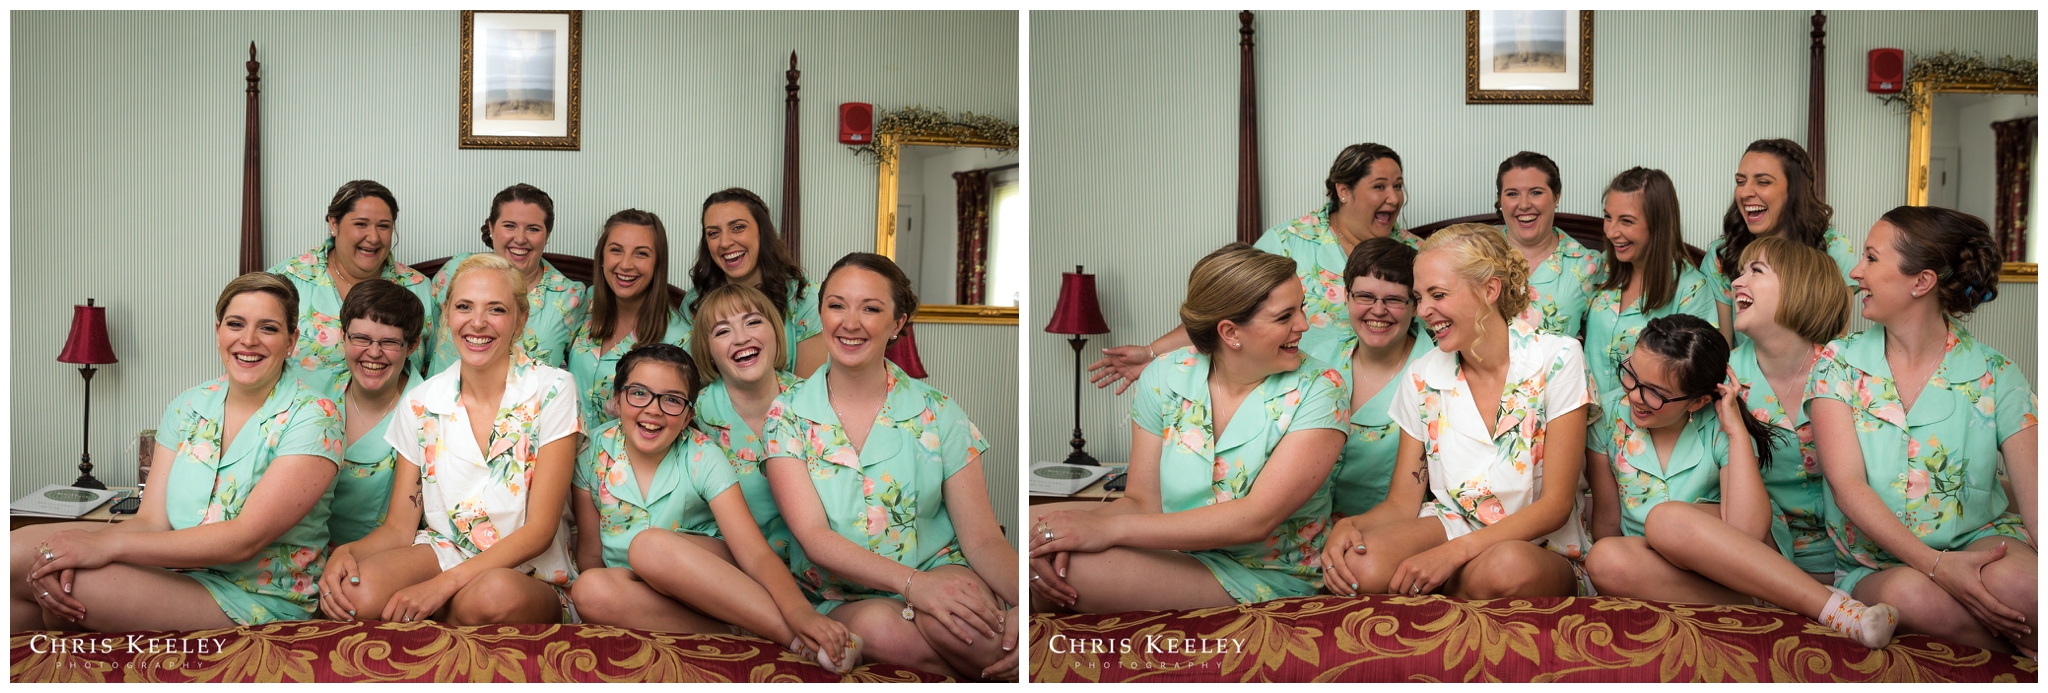 bride-and-bridesmaids-on-bed.jpg